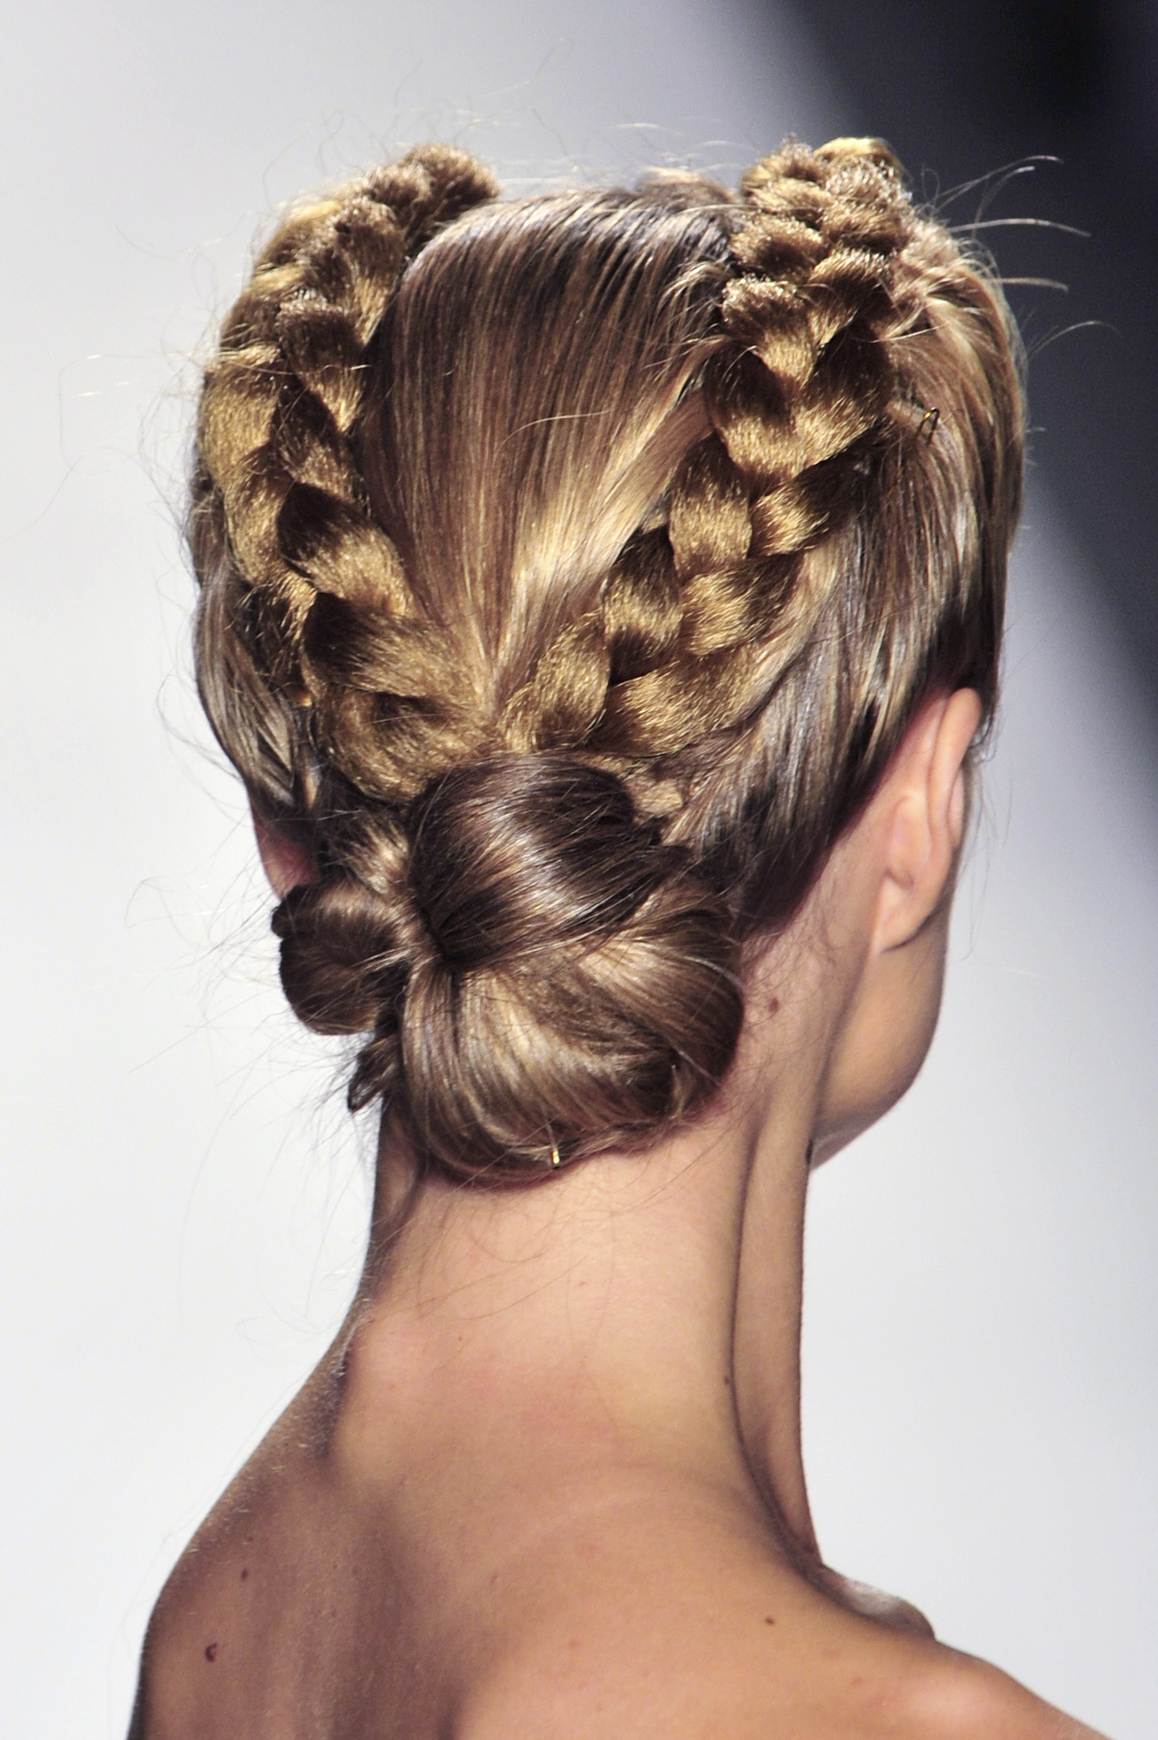 9 Hairstyle Inspirations From The Runway - The Singapore Women's Weekly